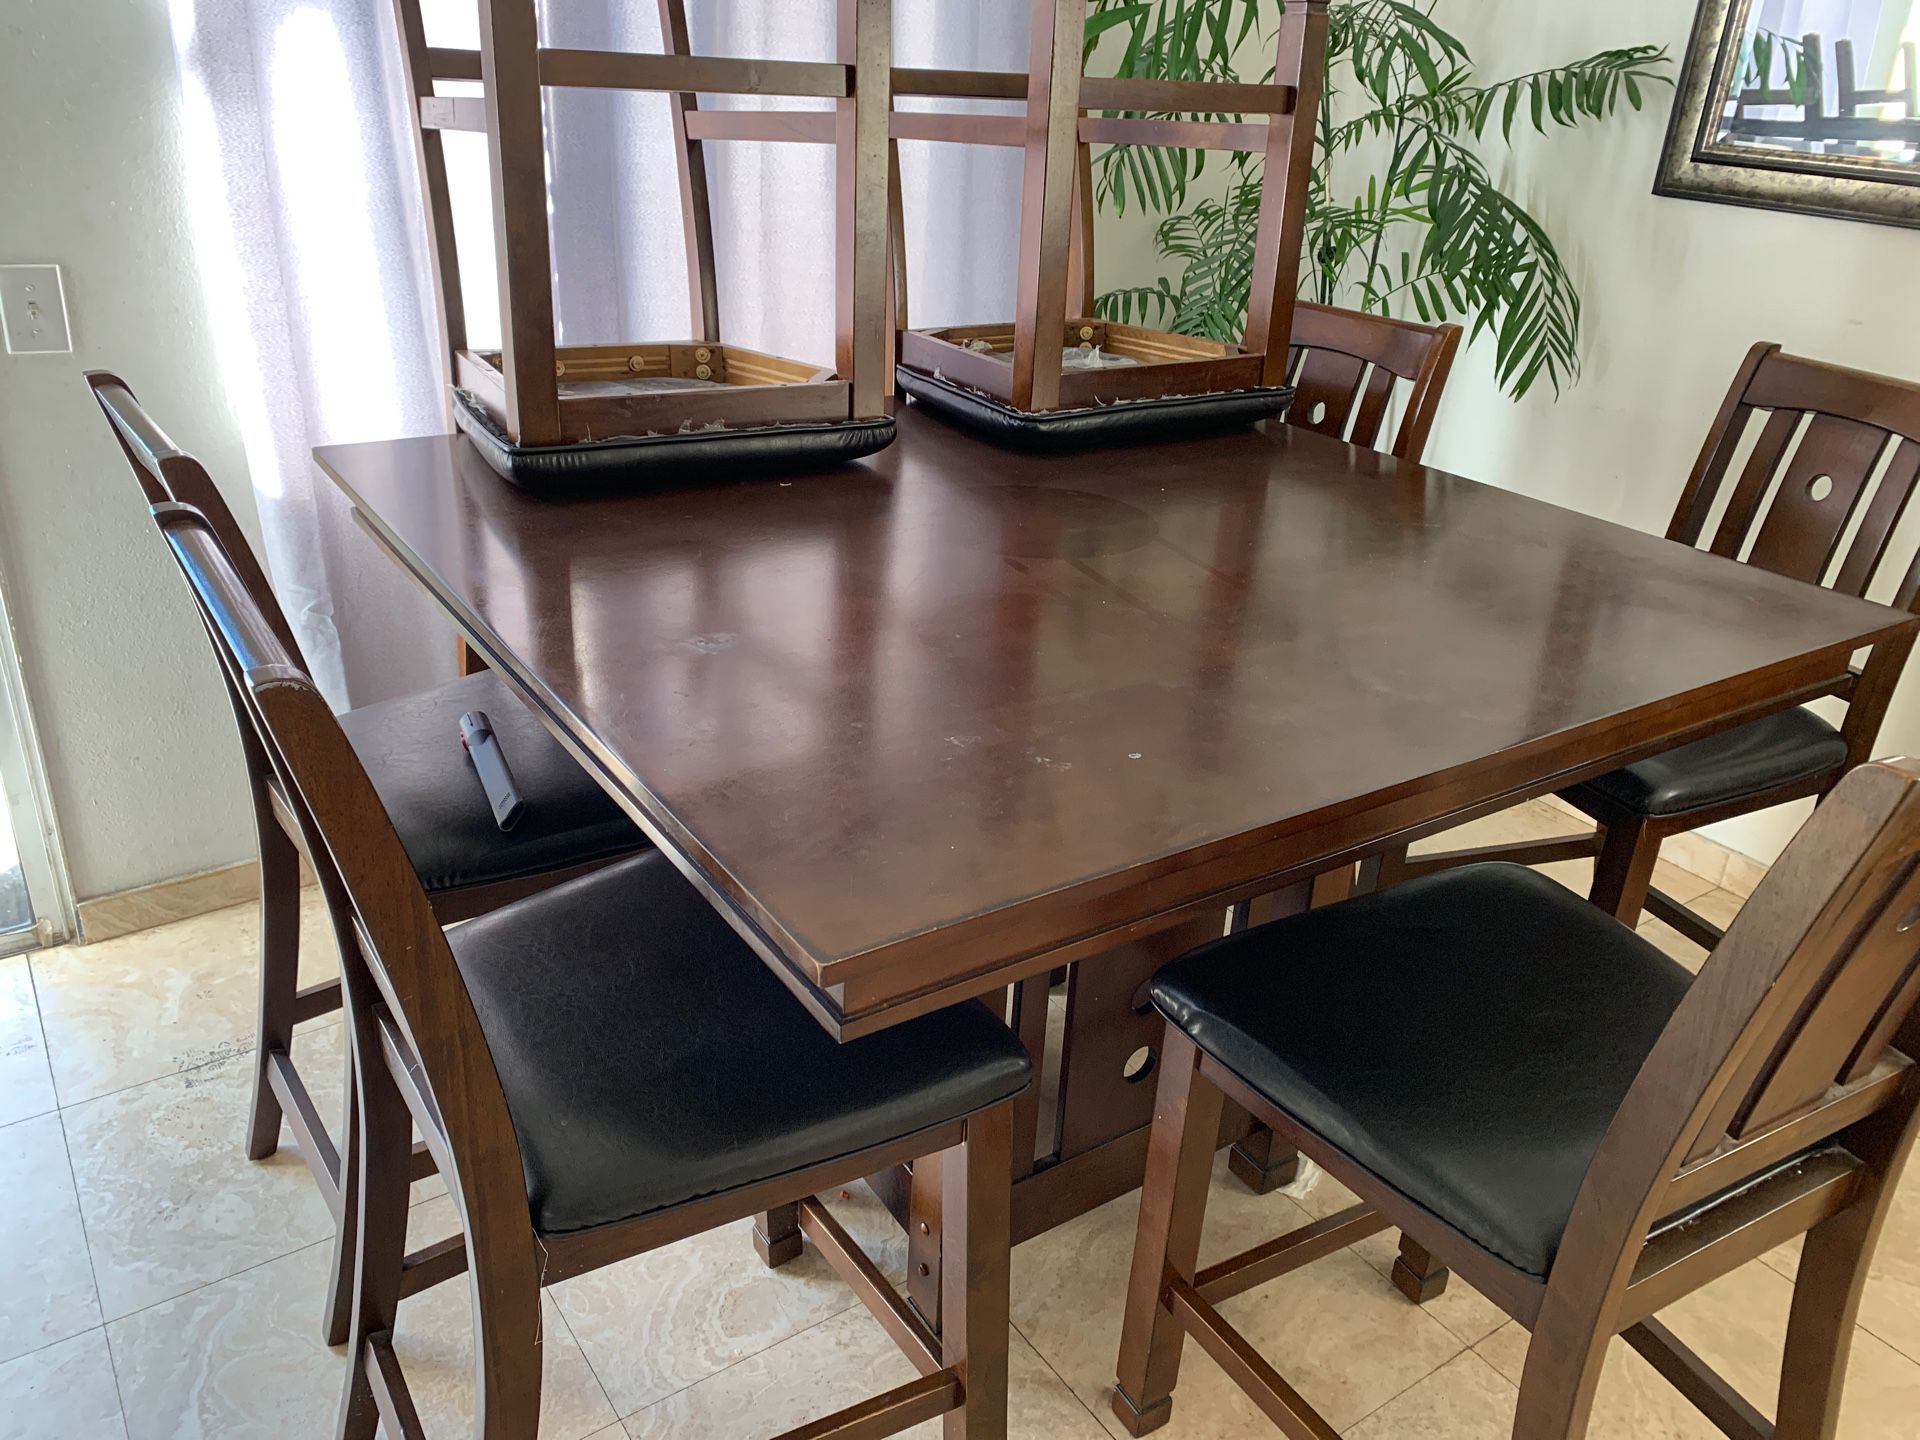 8 chairs Dining table